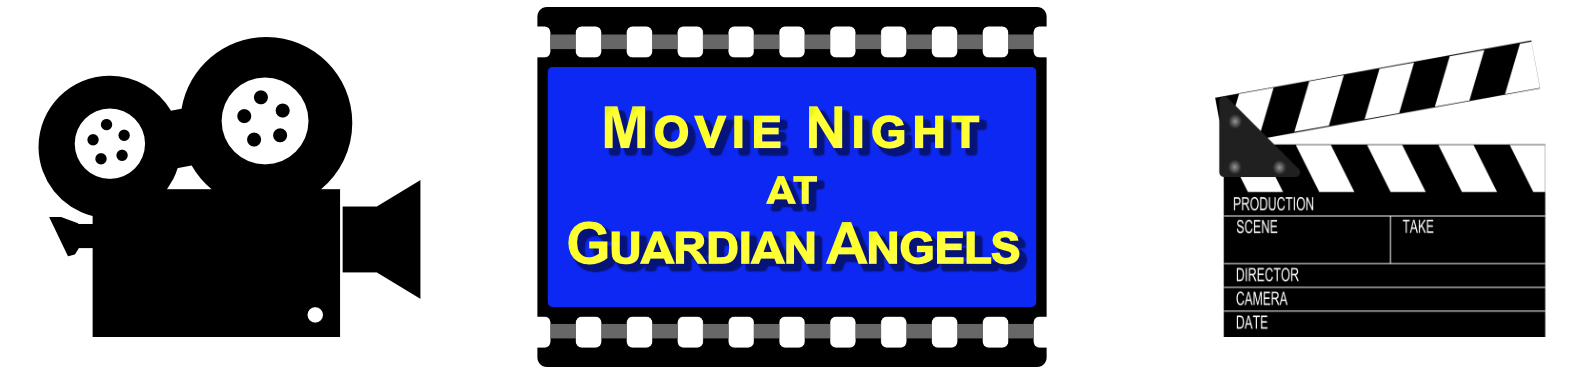 Movie night at Guardian Angels showing a Camera and clapboard